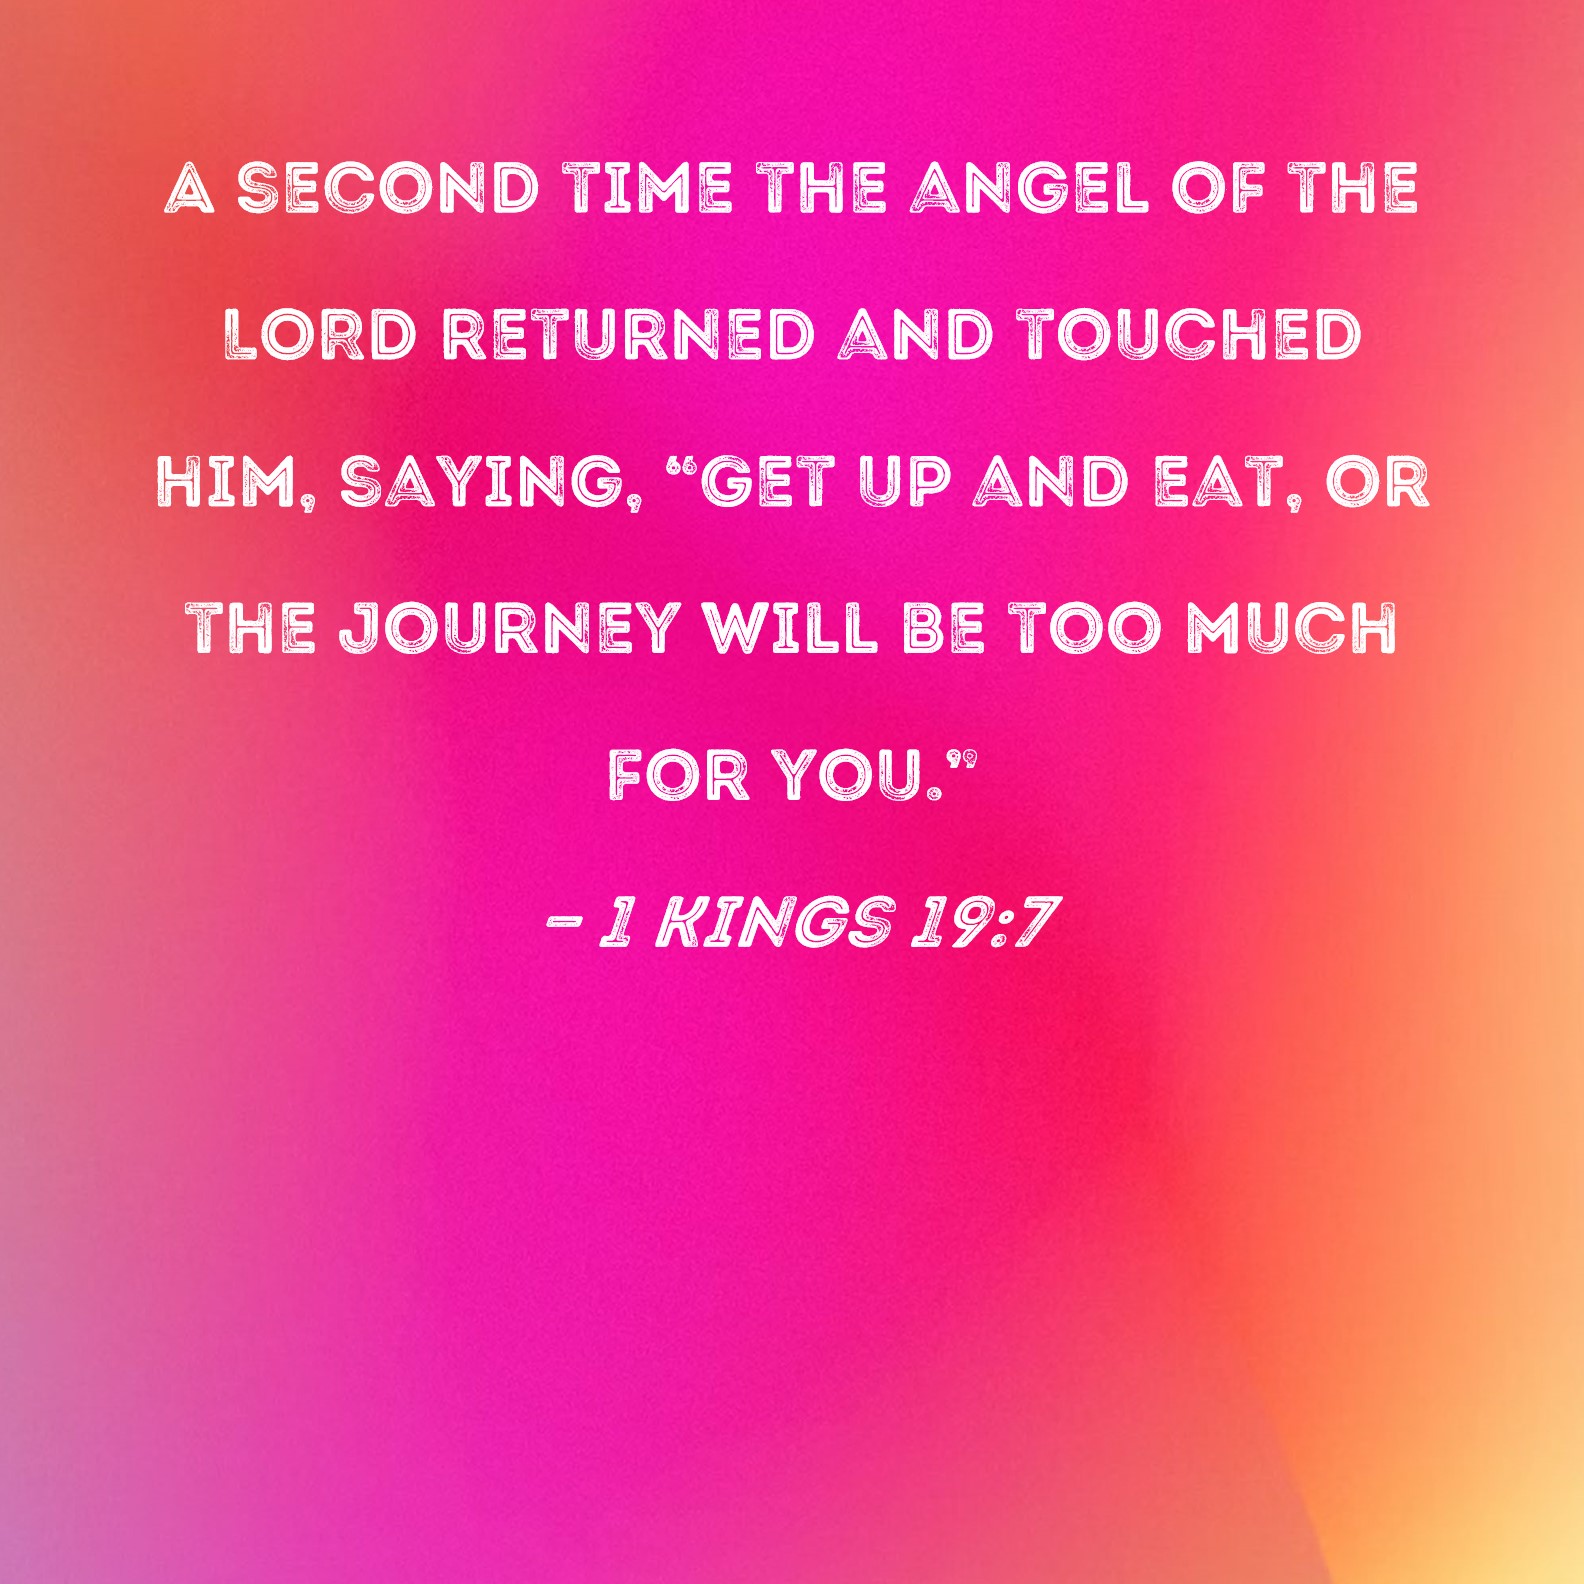 1 Kings 19:7 A second time the angel of the LORD returned and touched him,  saying, Get up and eat, or the journey will be too much for you.